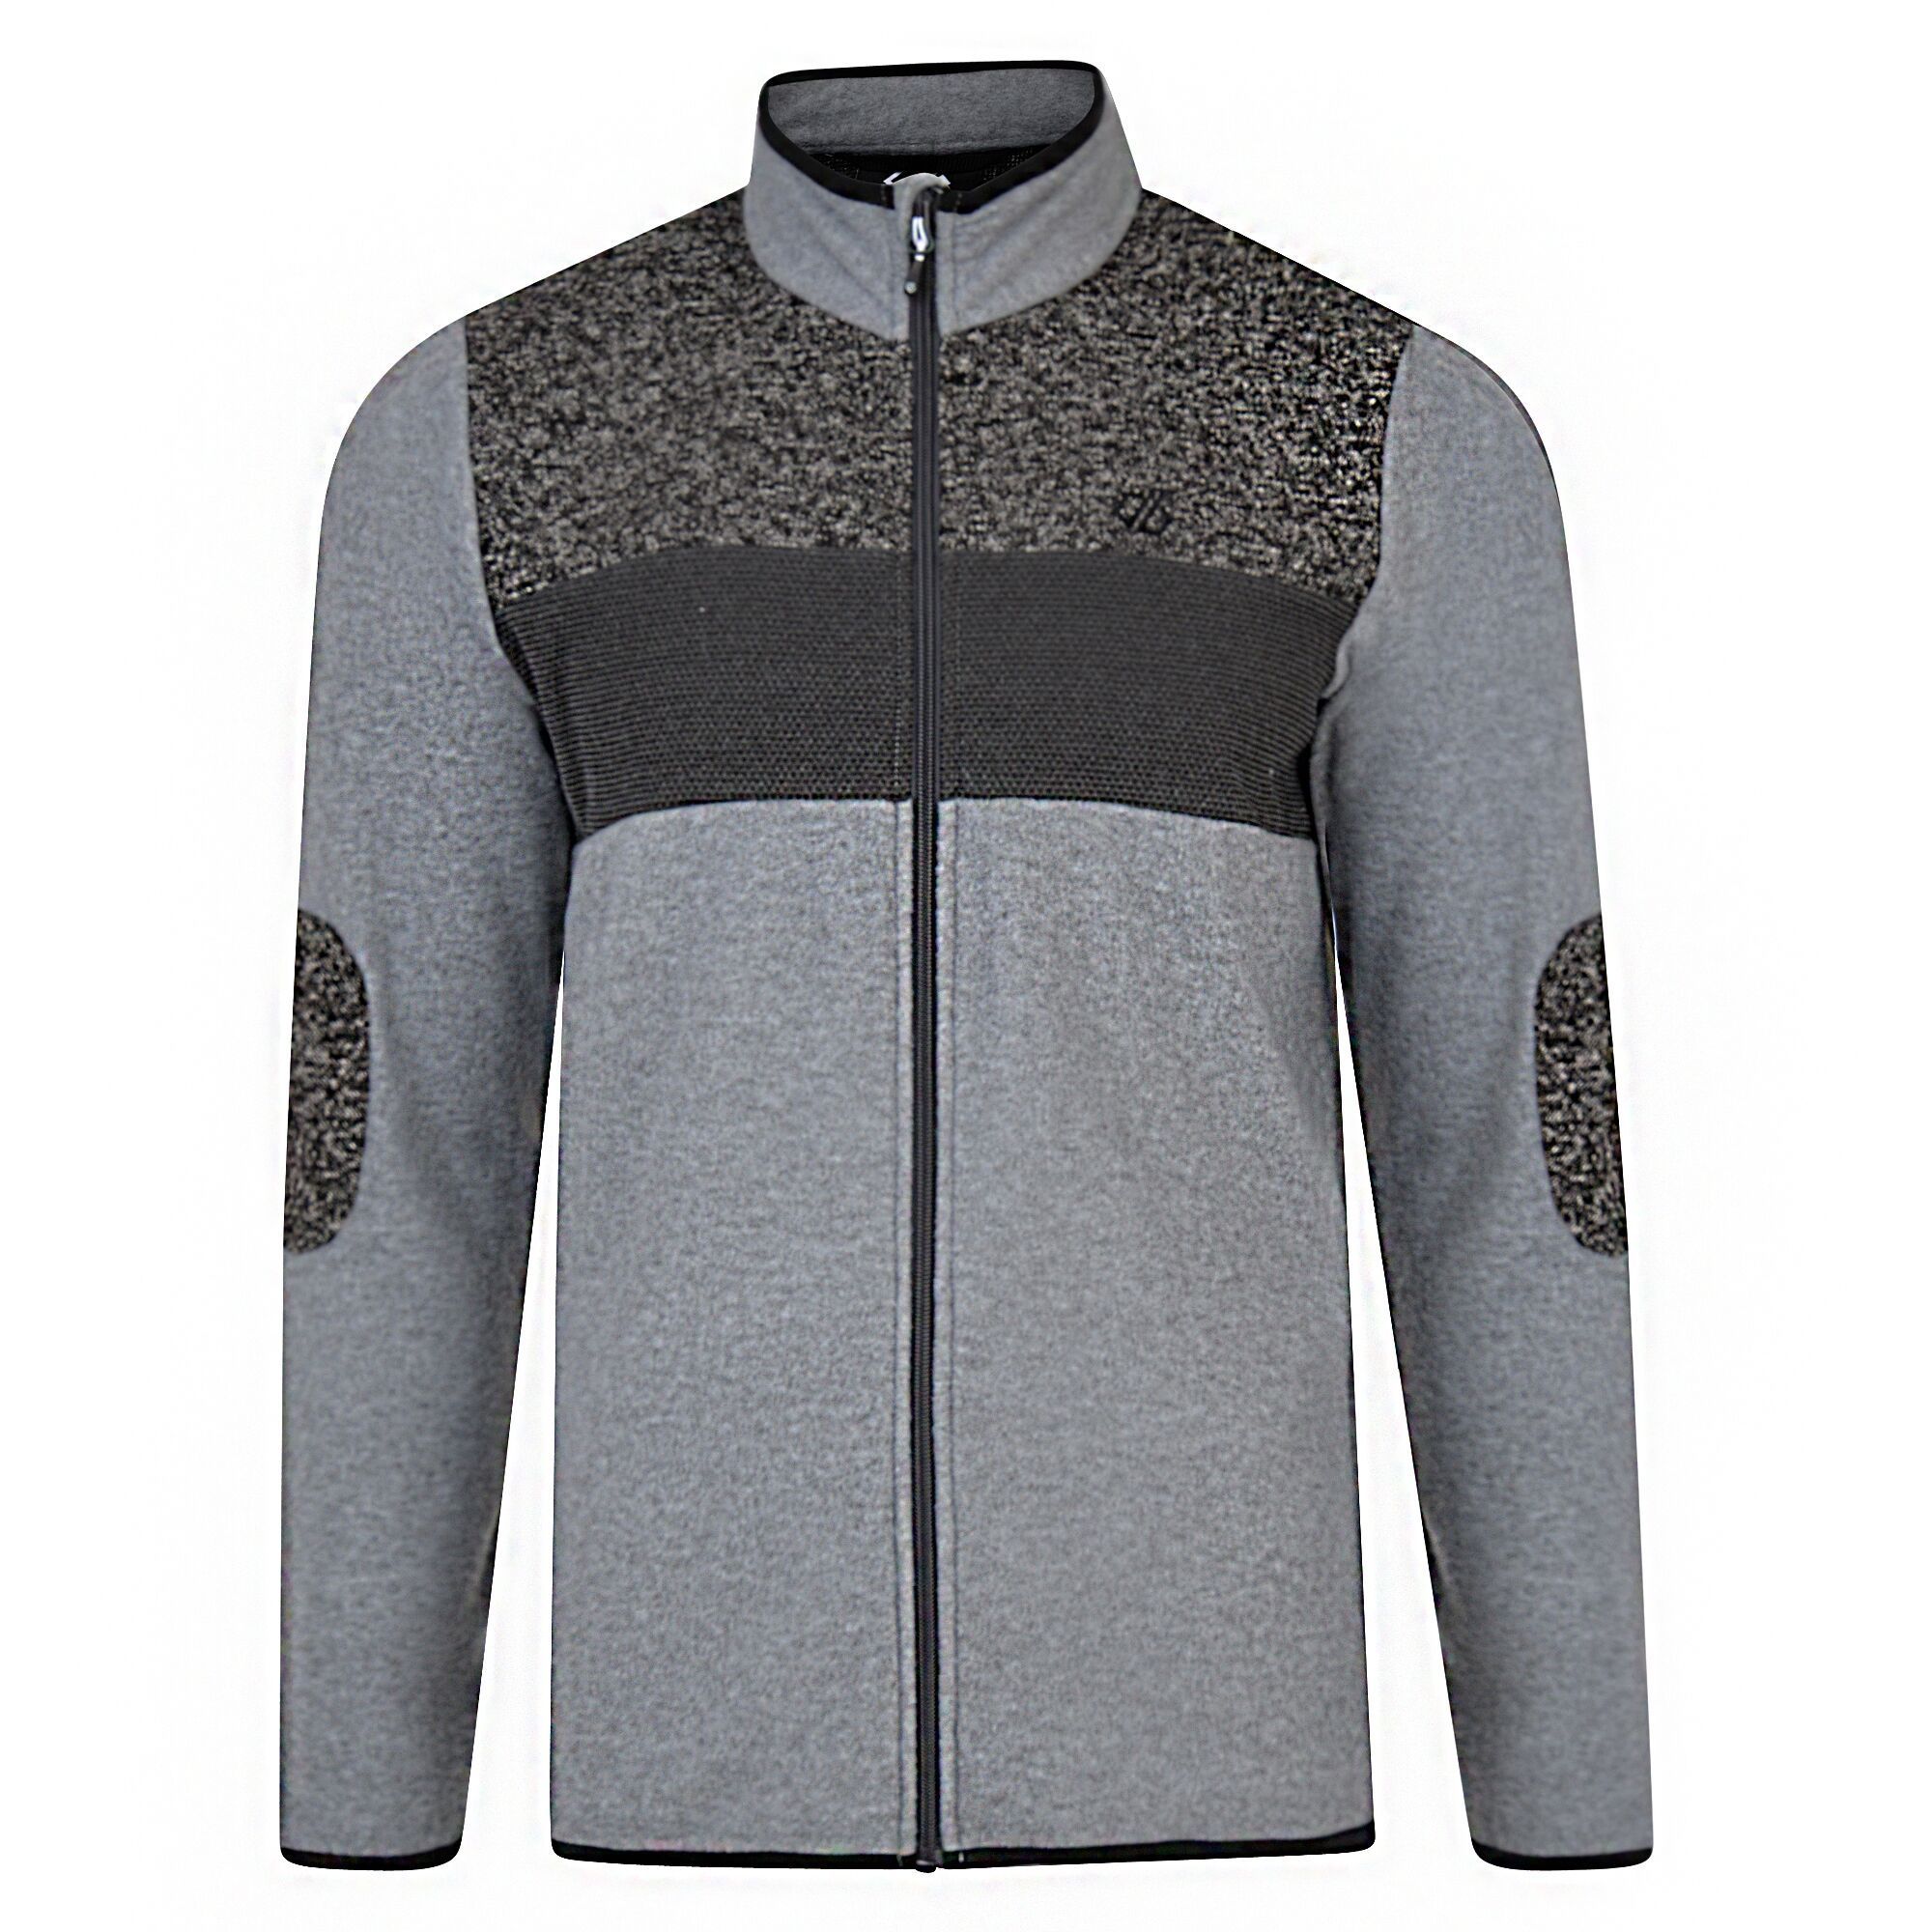 100% polyester marl knit effect fleece with contrast textured knit panels. Full length zip with inner zip and chin guard. Applique elbow patches. 2 lower zip pockets. Stretch binding to collar, cuffs and hem.